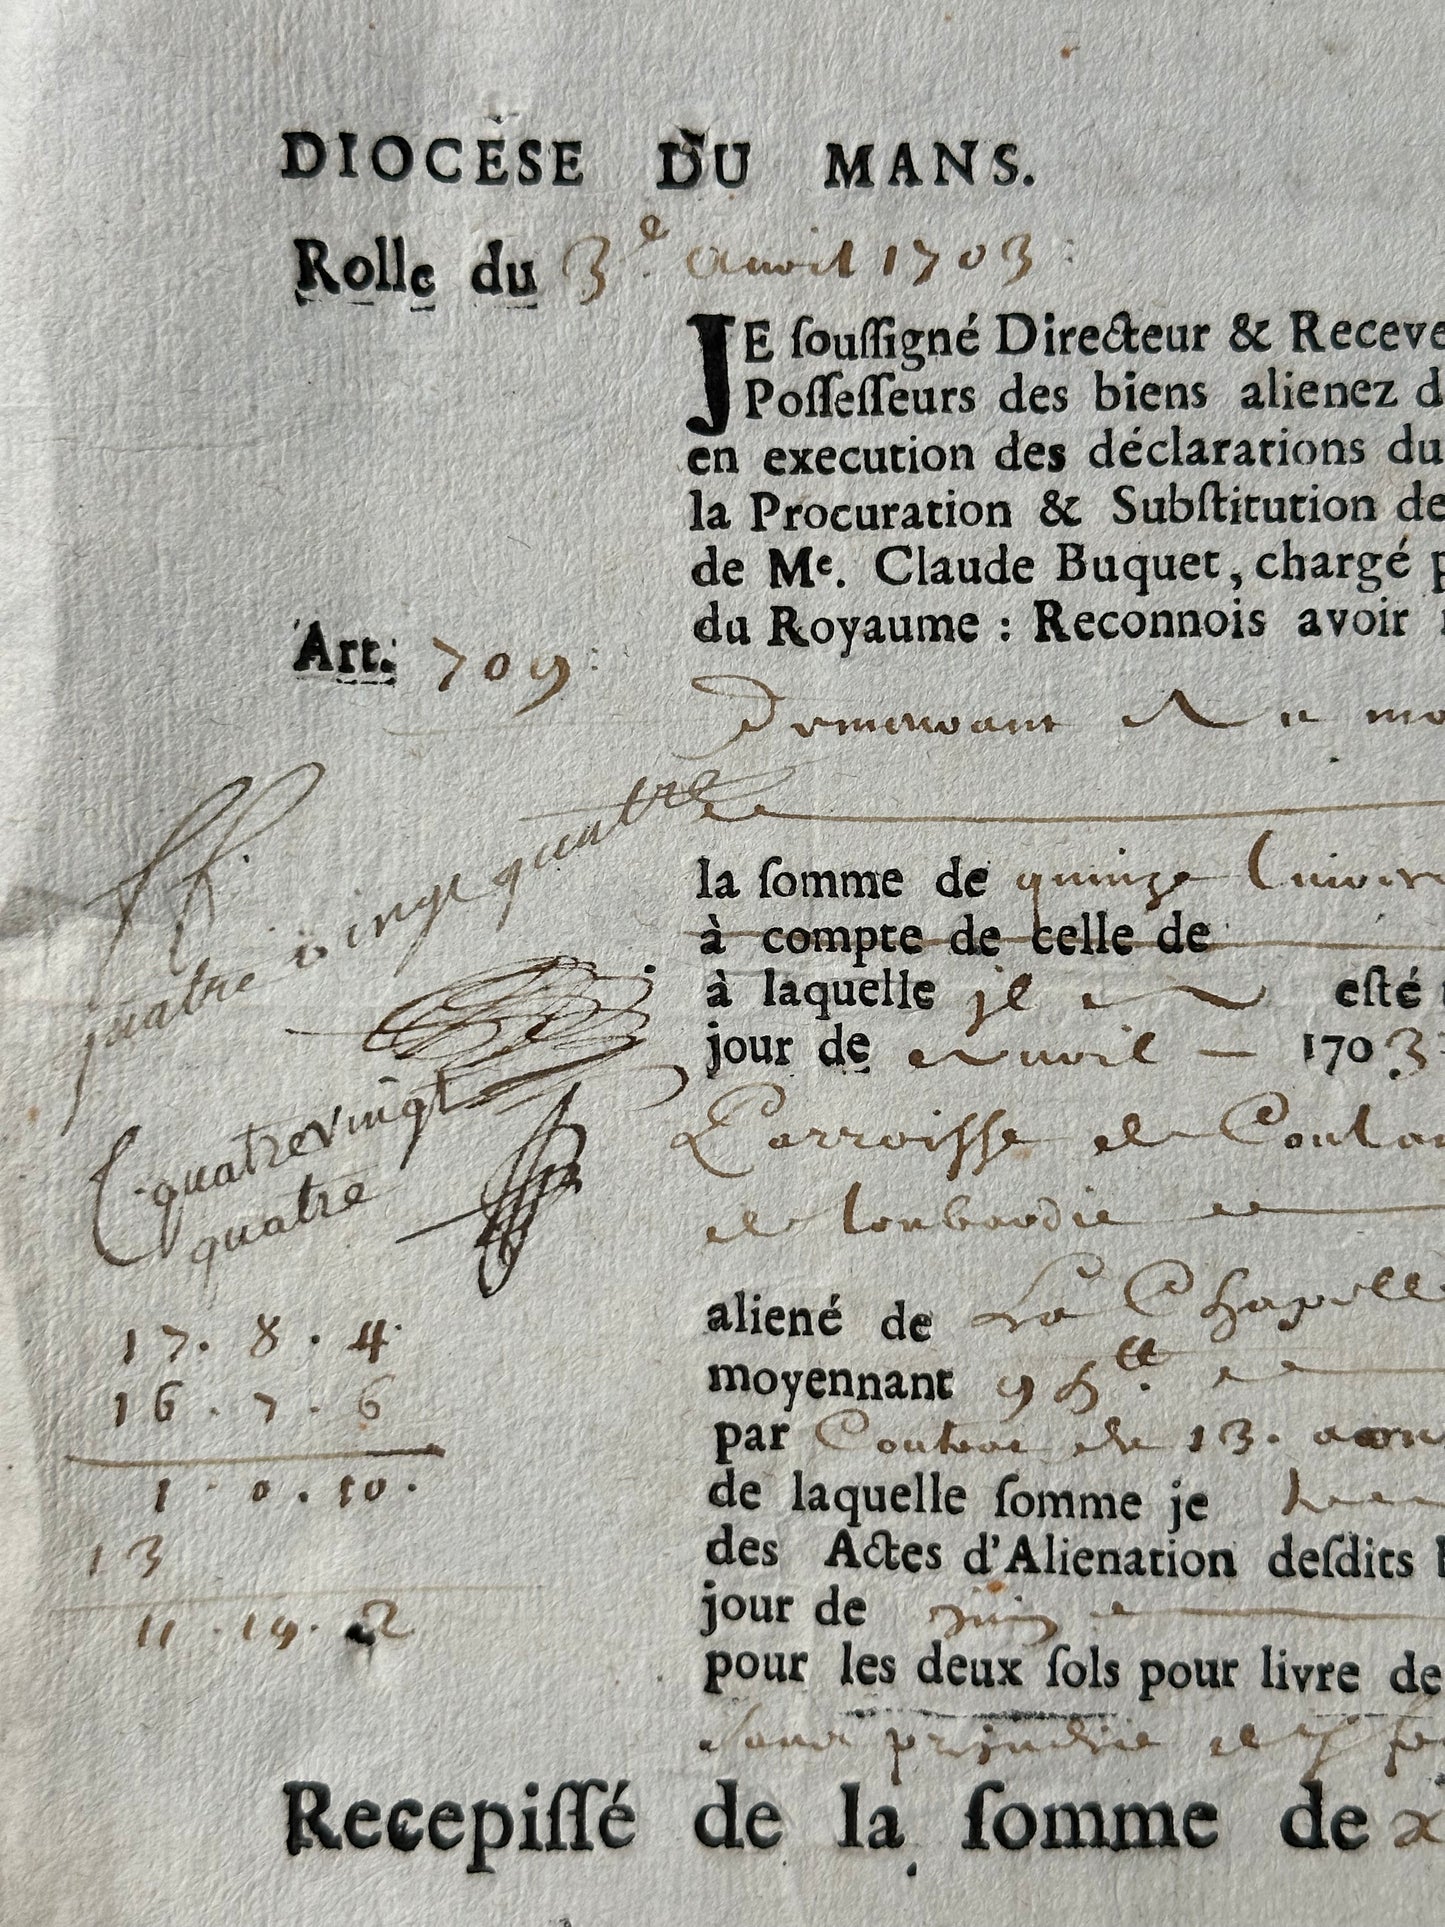 1703 French Catholic Financial Certificate